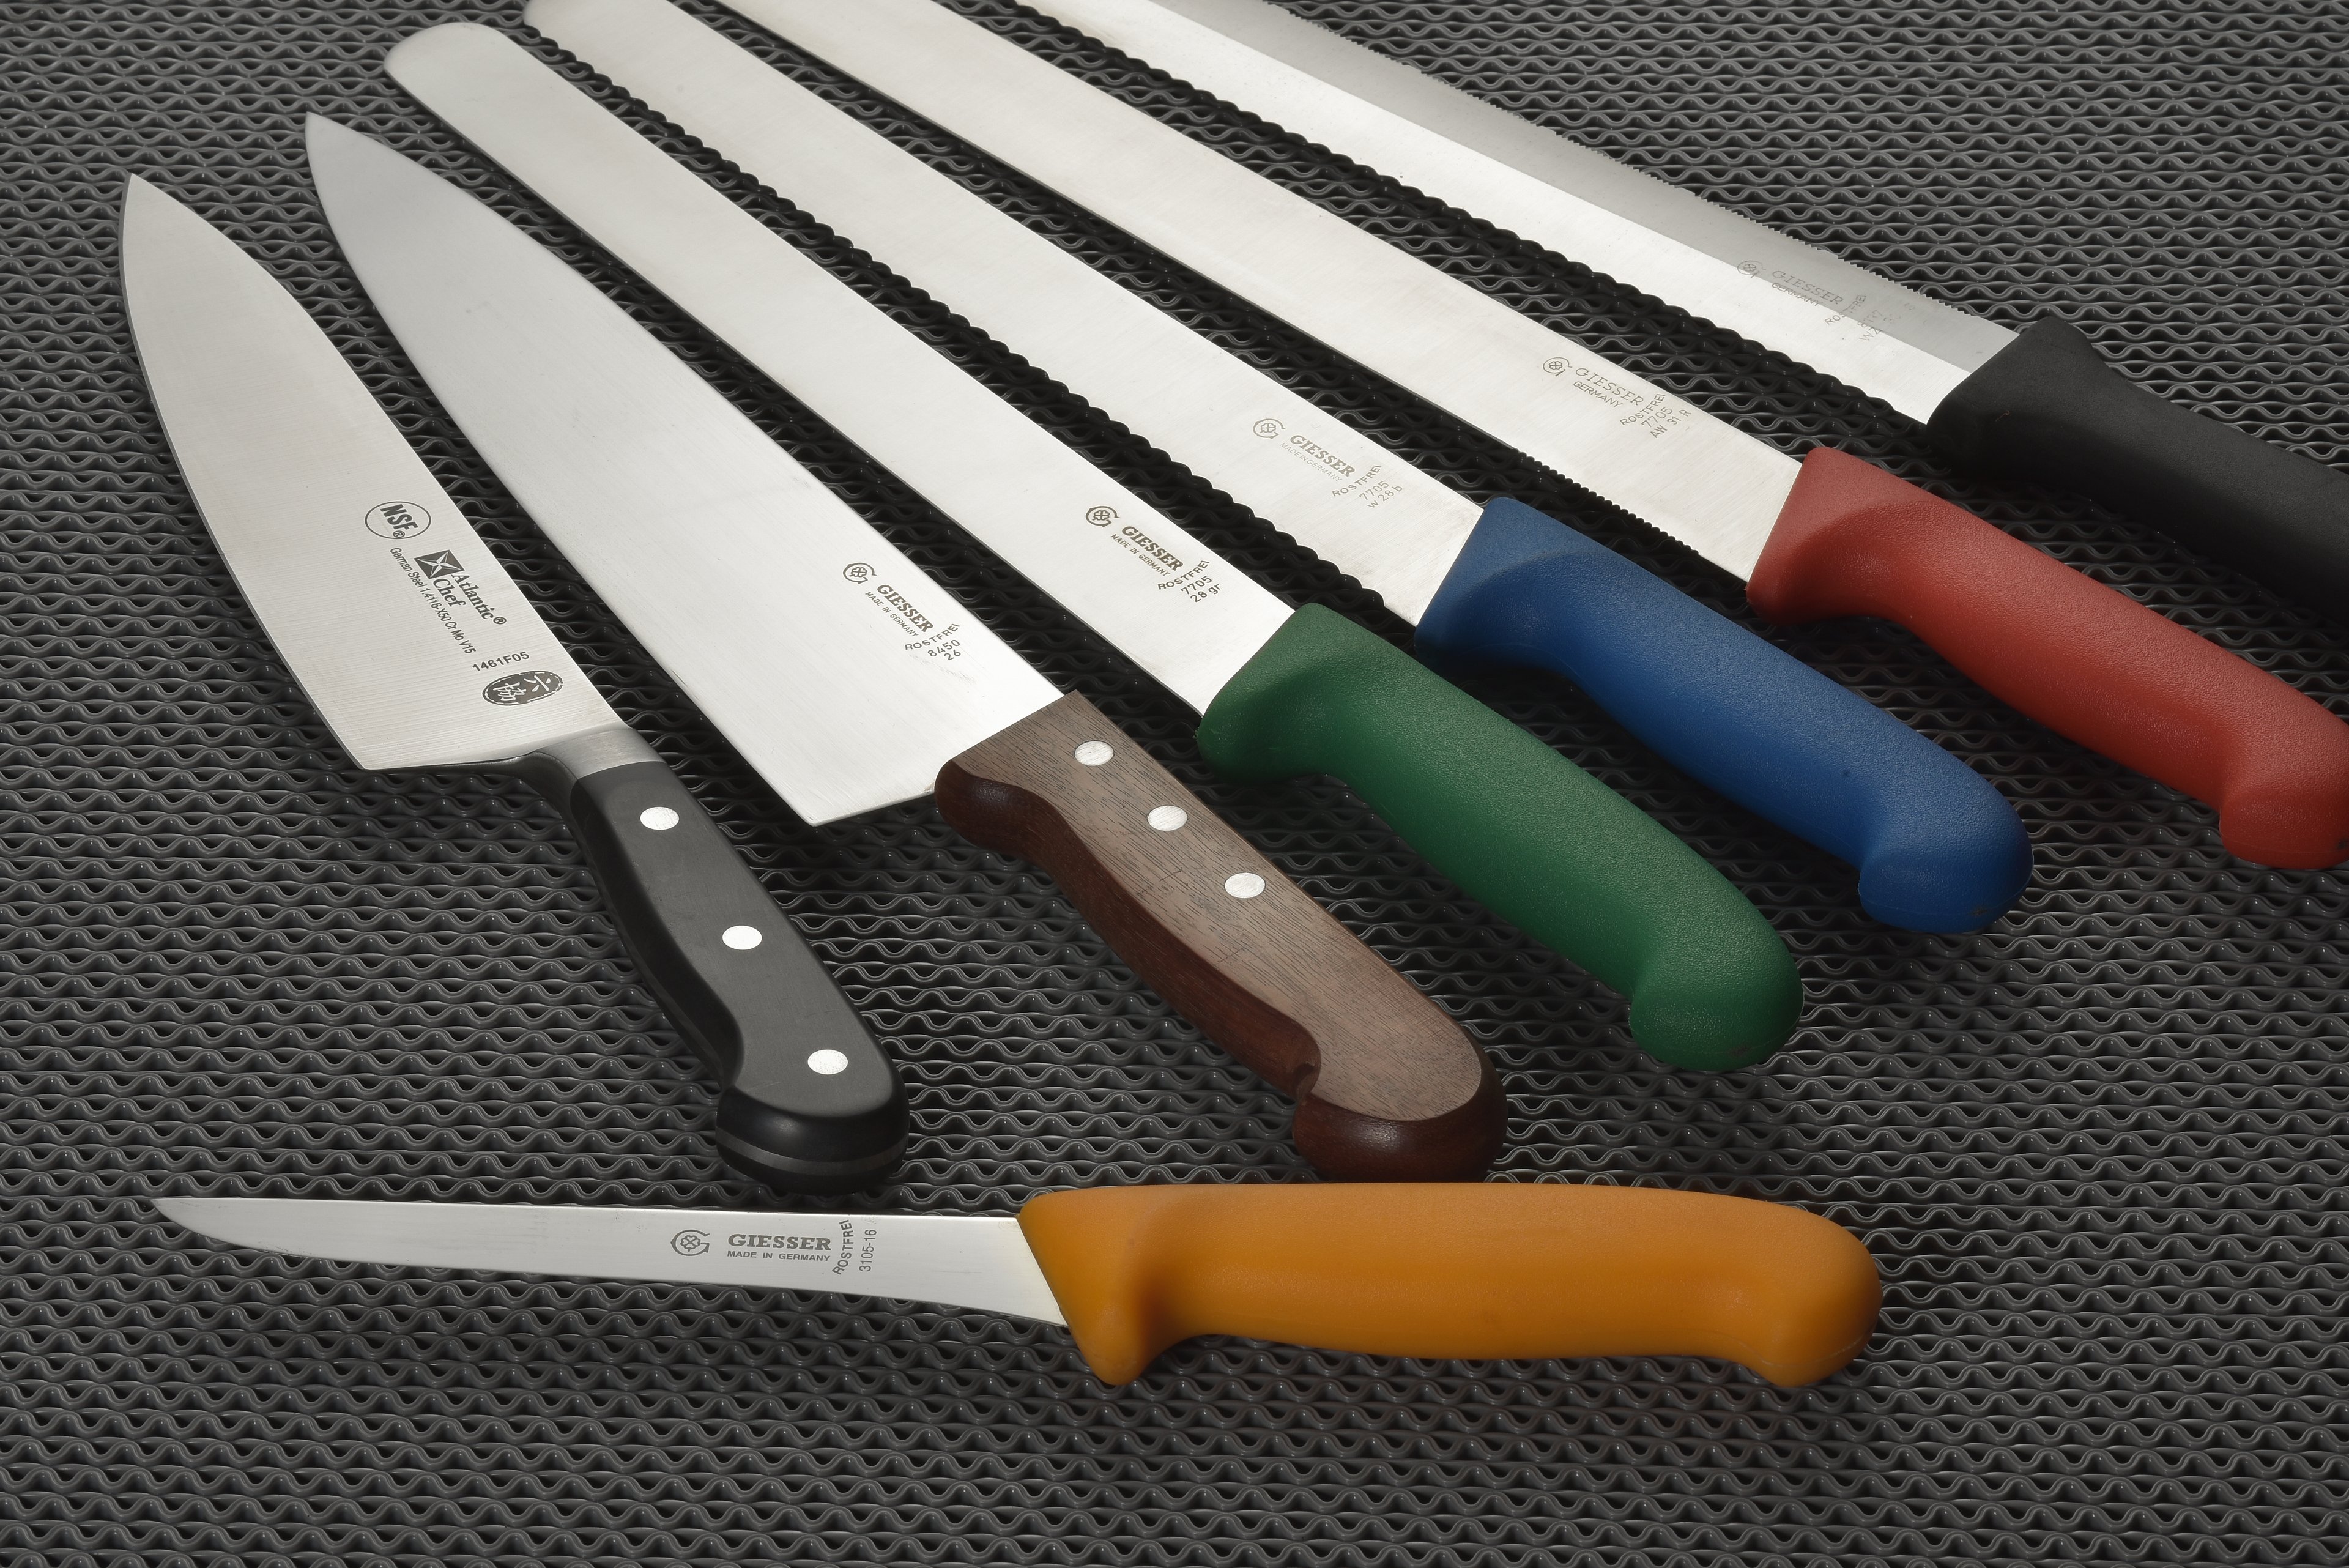 Professional western chef and preparation knives